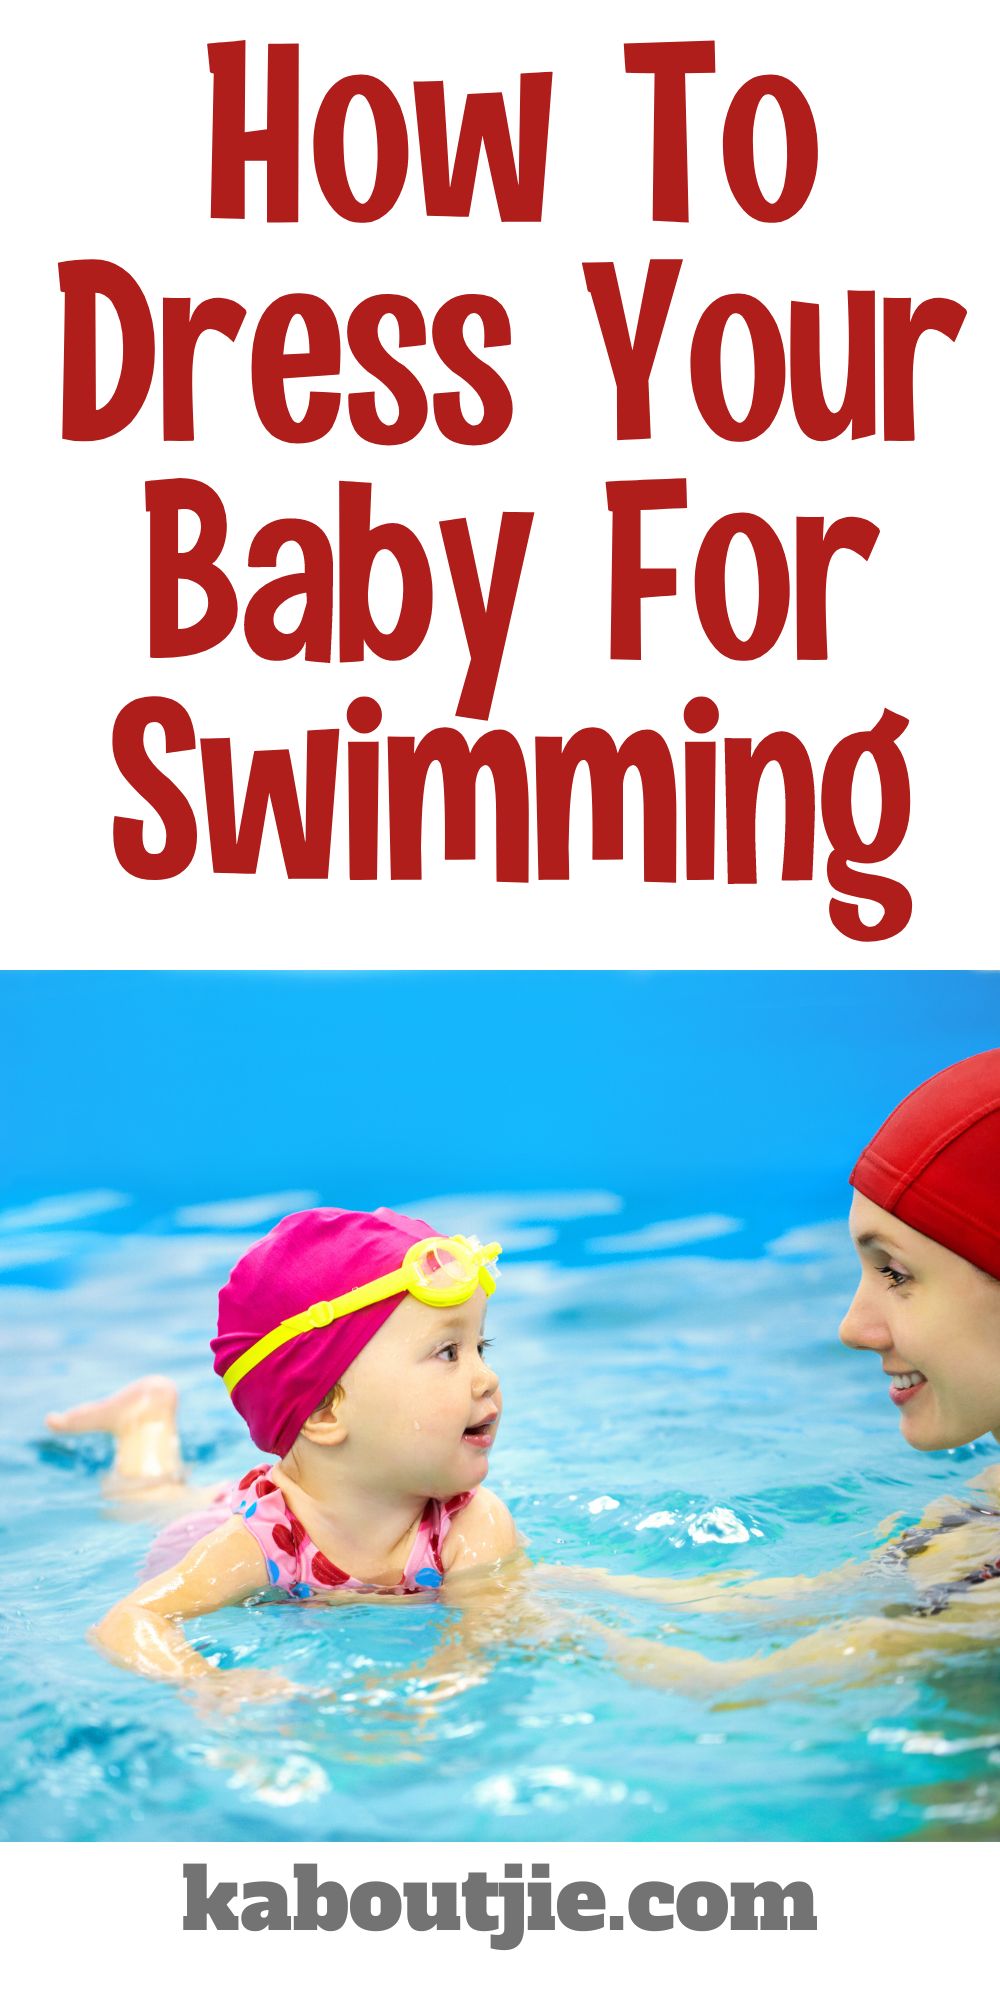 How to dress your baby for swimming